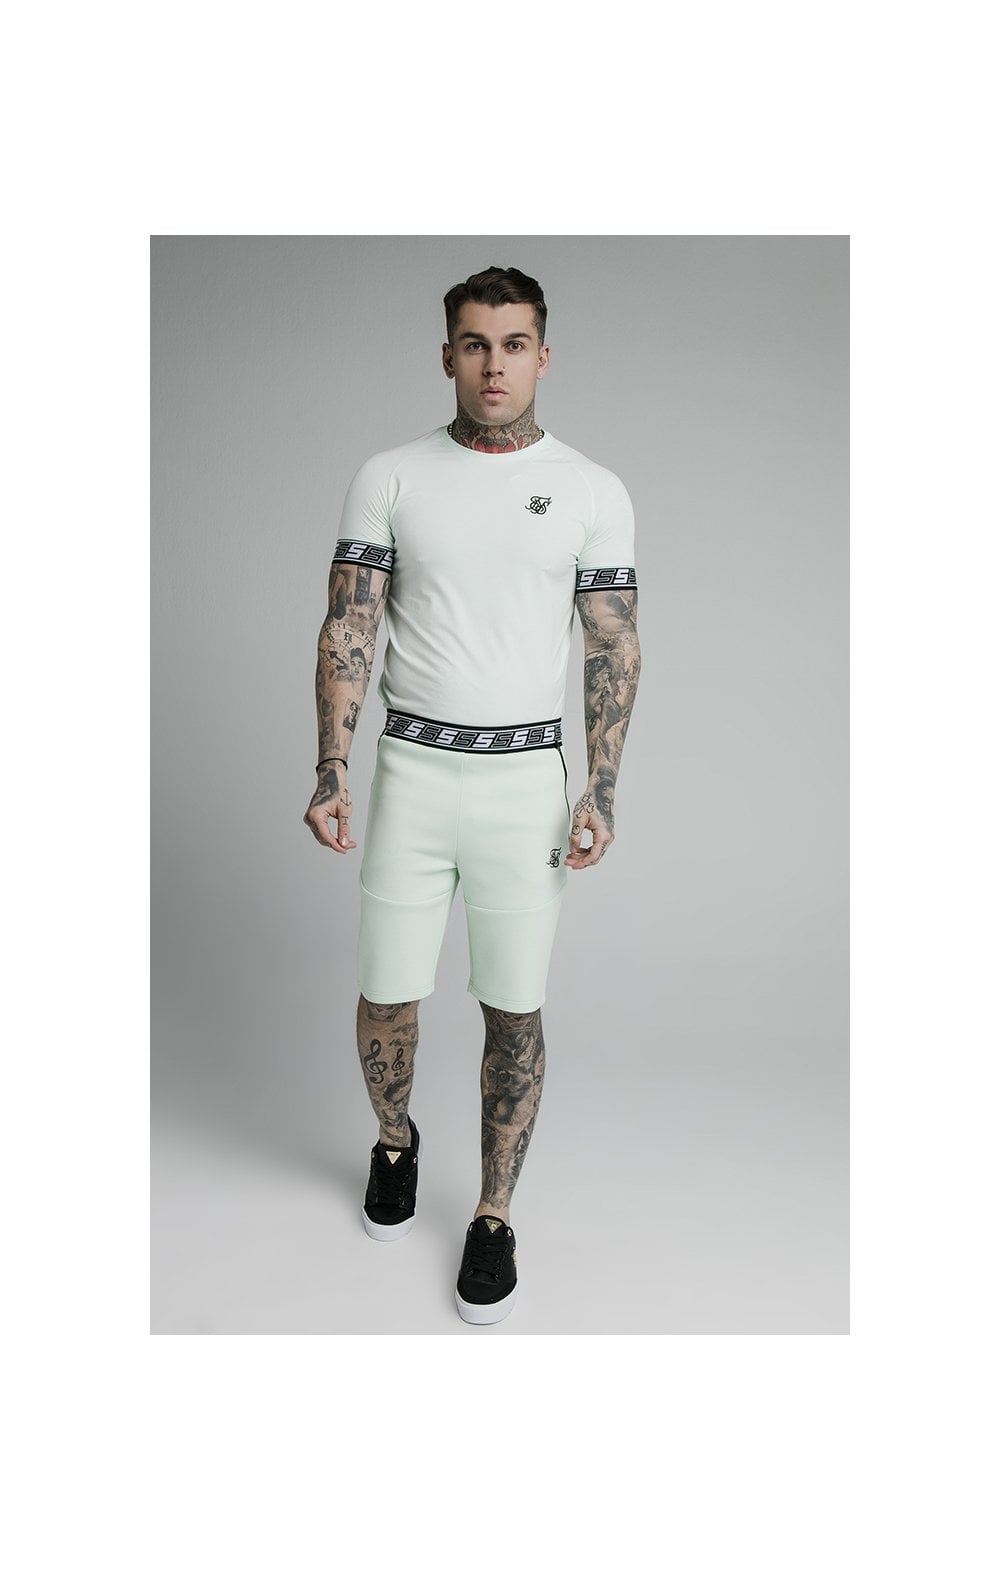 Load image into Gallery viewer, SikSilk S/S Exhibit Tech Tee - Aqua Teal (3)